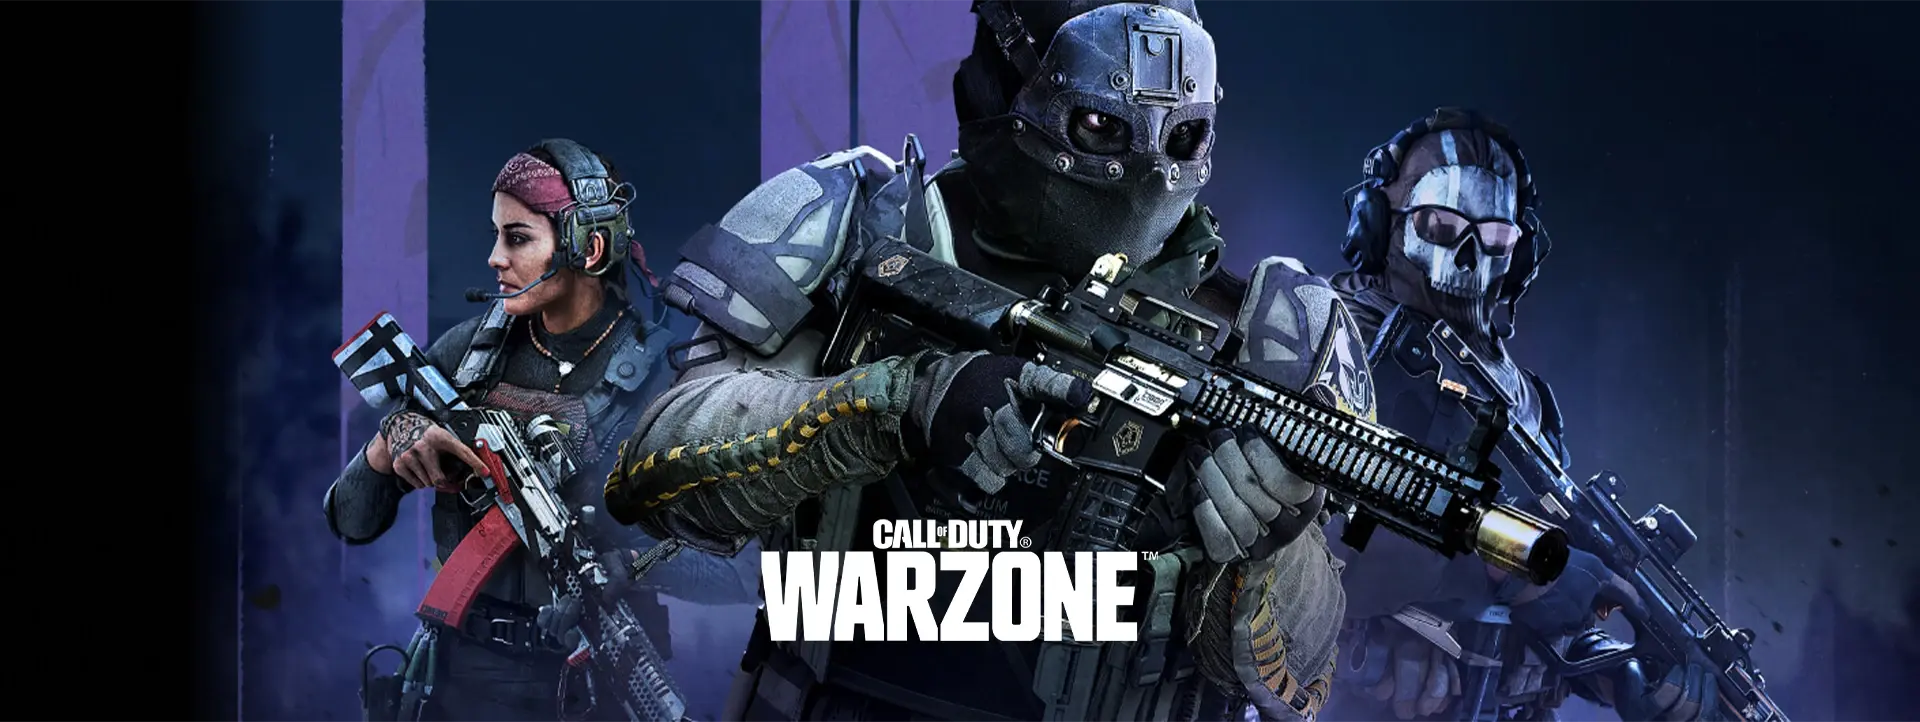 Everything You Need to Know About World Series of Warzone™ 2023